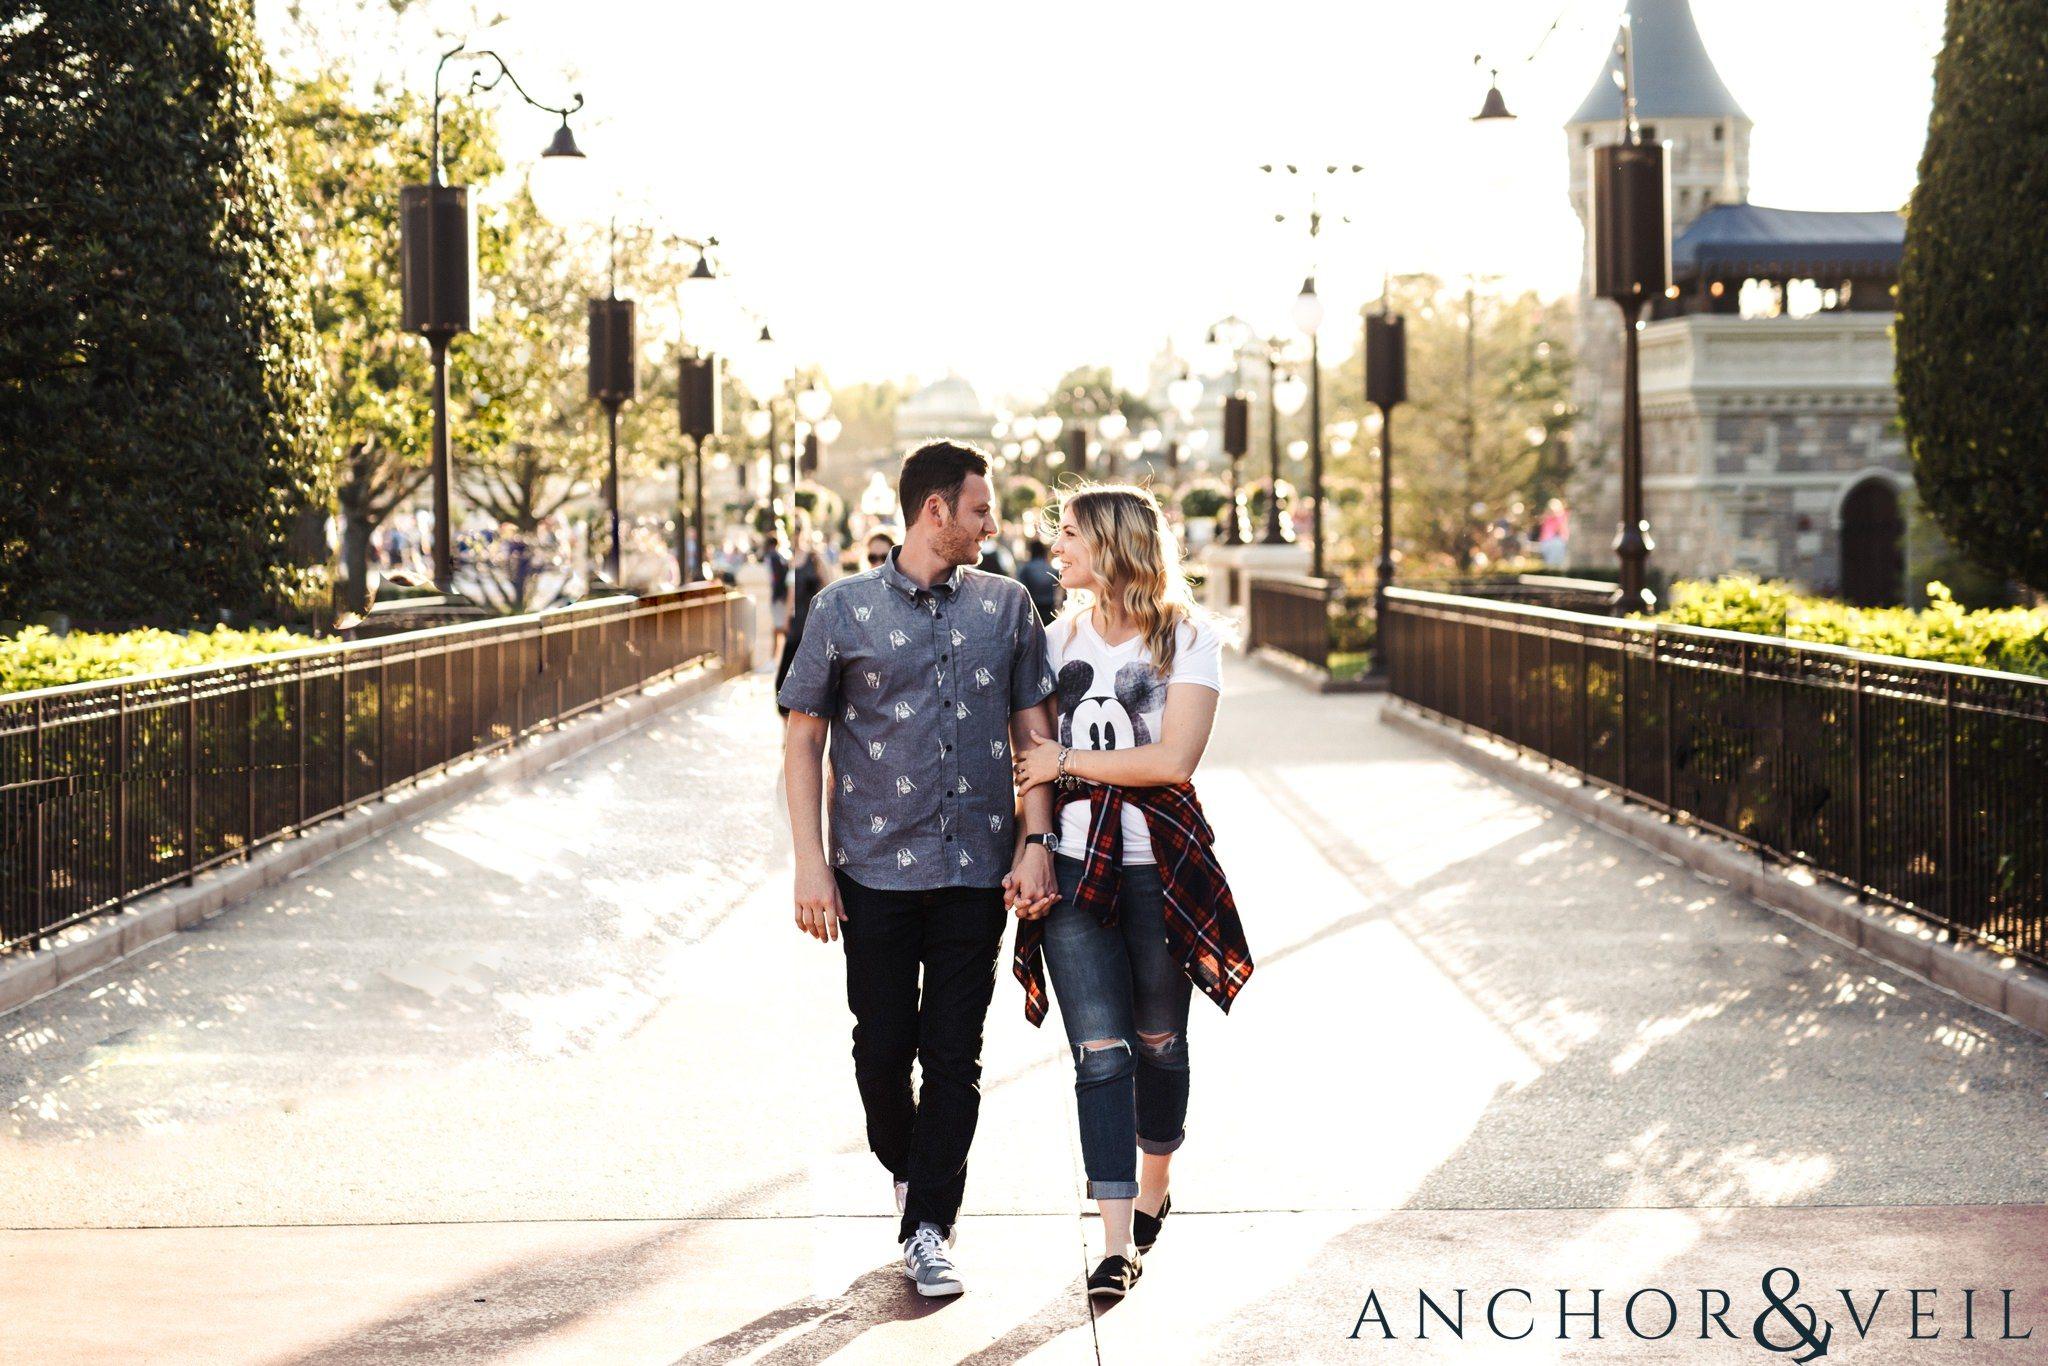 walking hand in hand on the bridge during their Disney world engagement session at Disney's Magic Kingdom